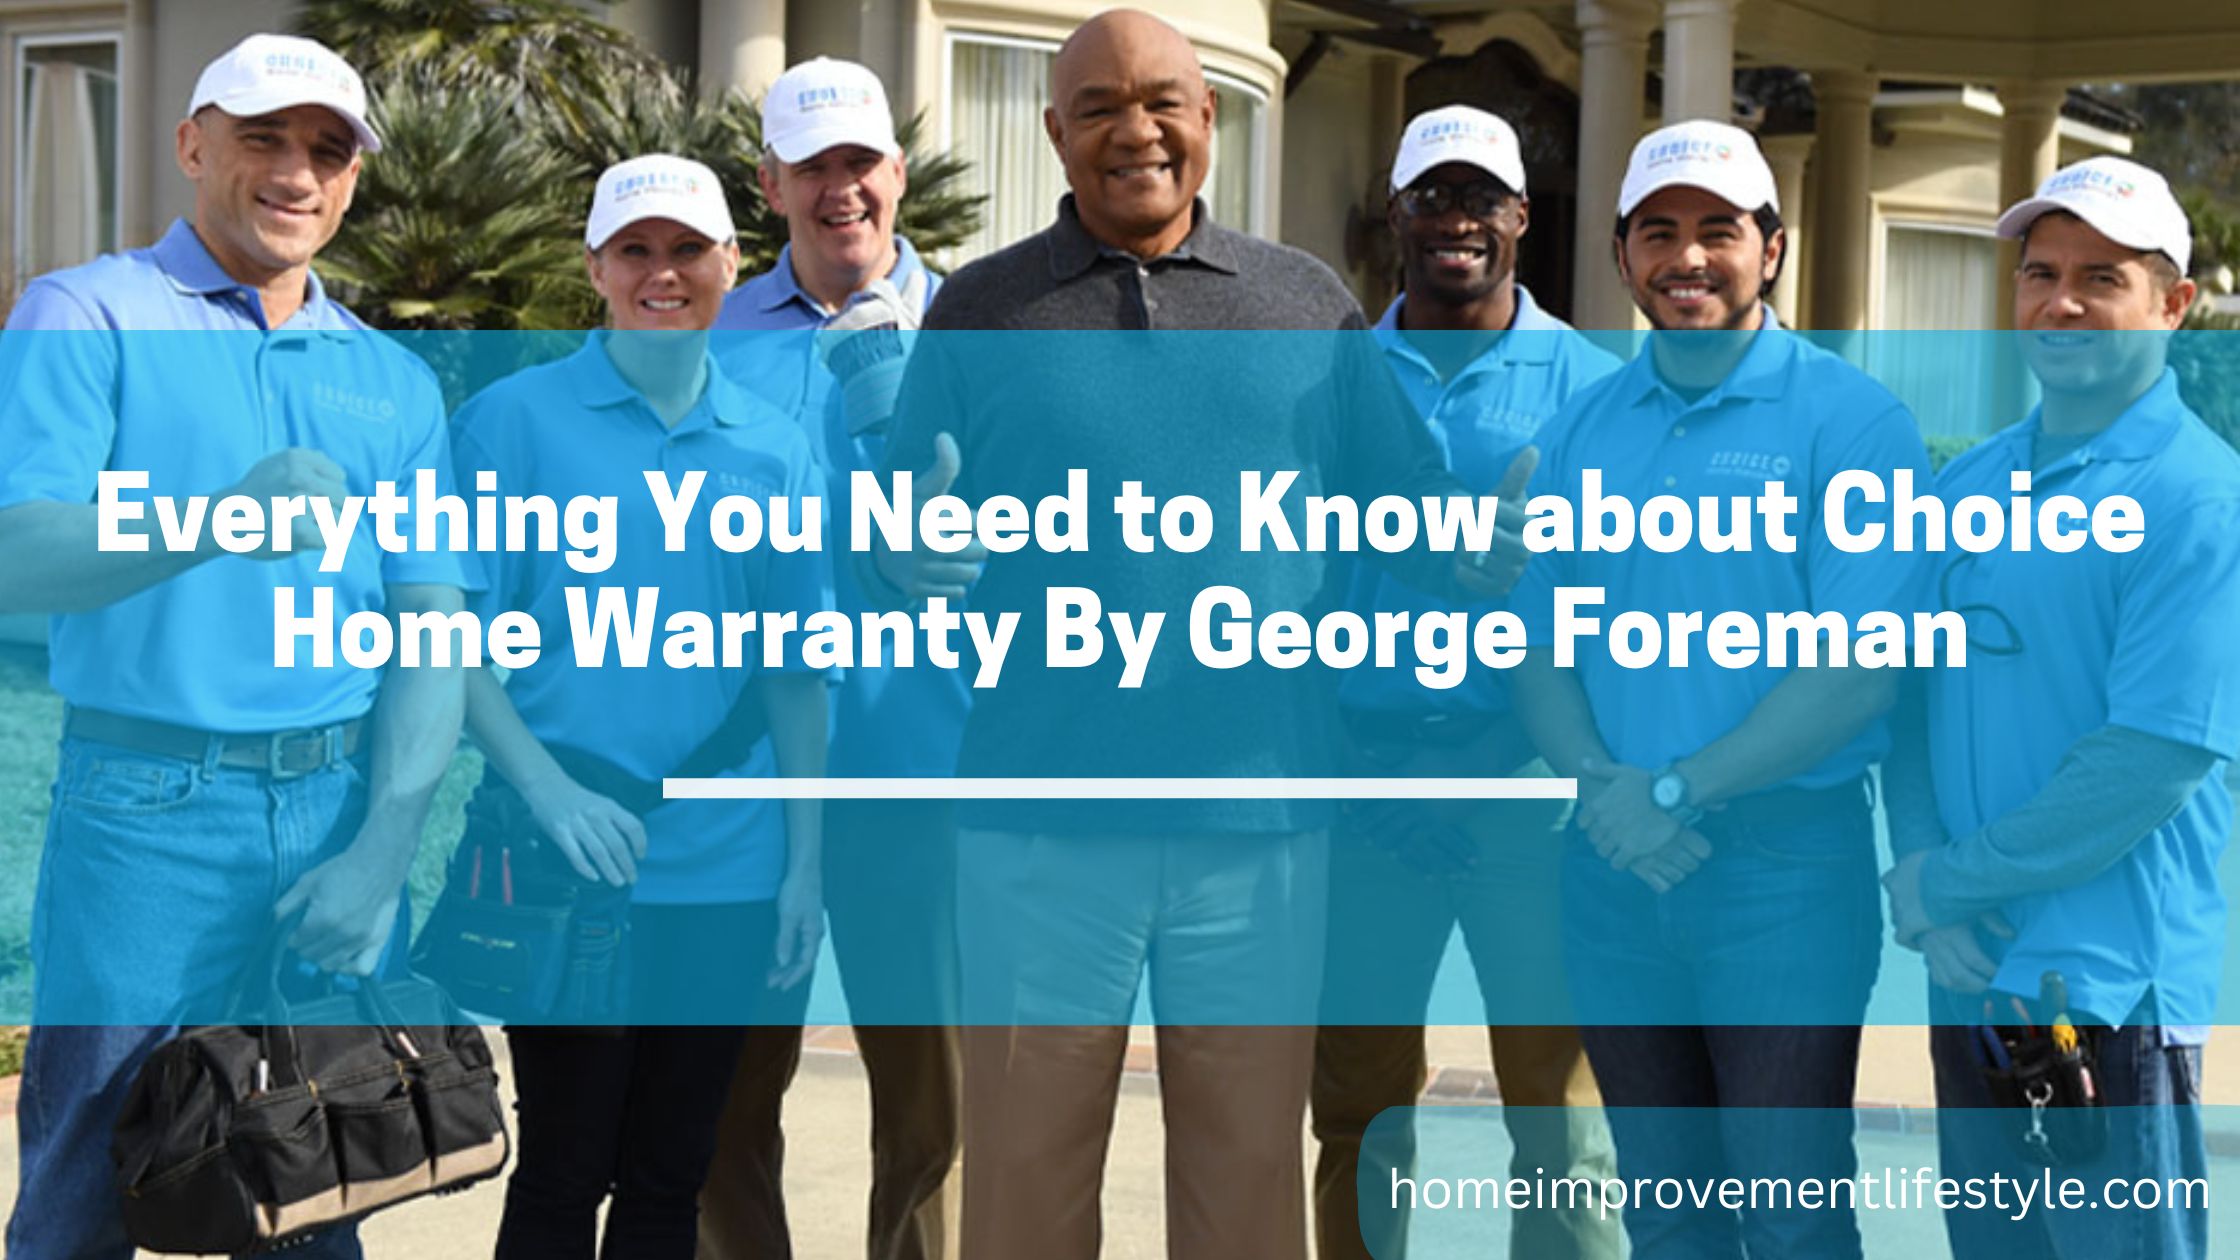 Everything You Need to Know about Choice Home Warranty By George Foreman